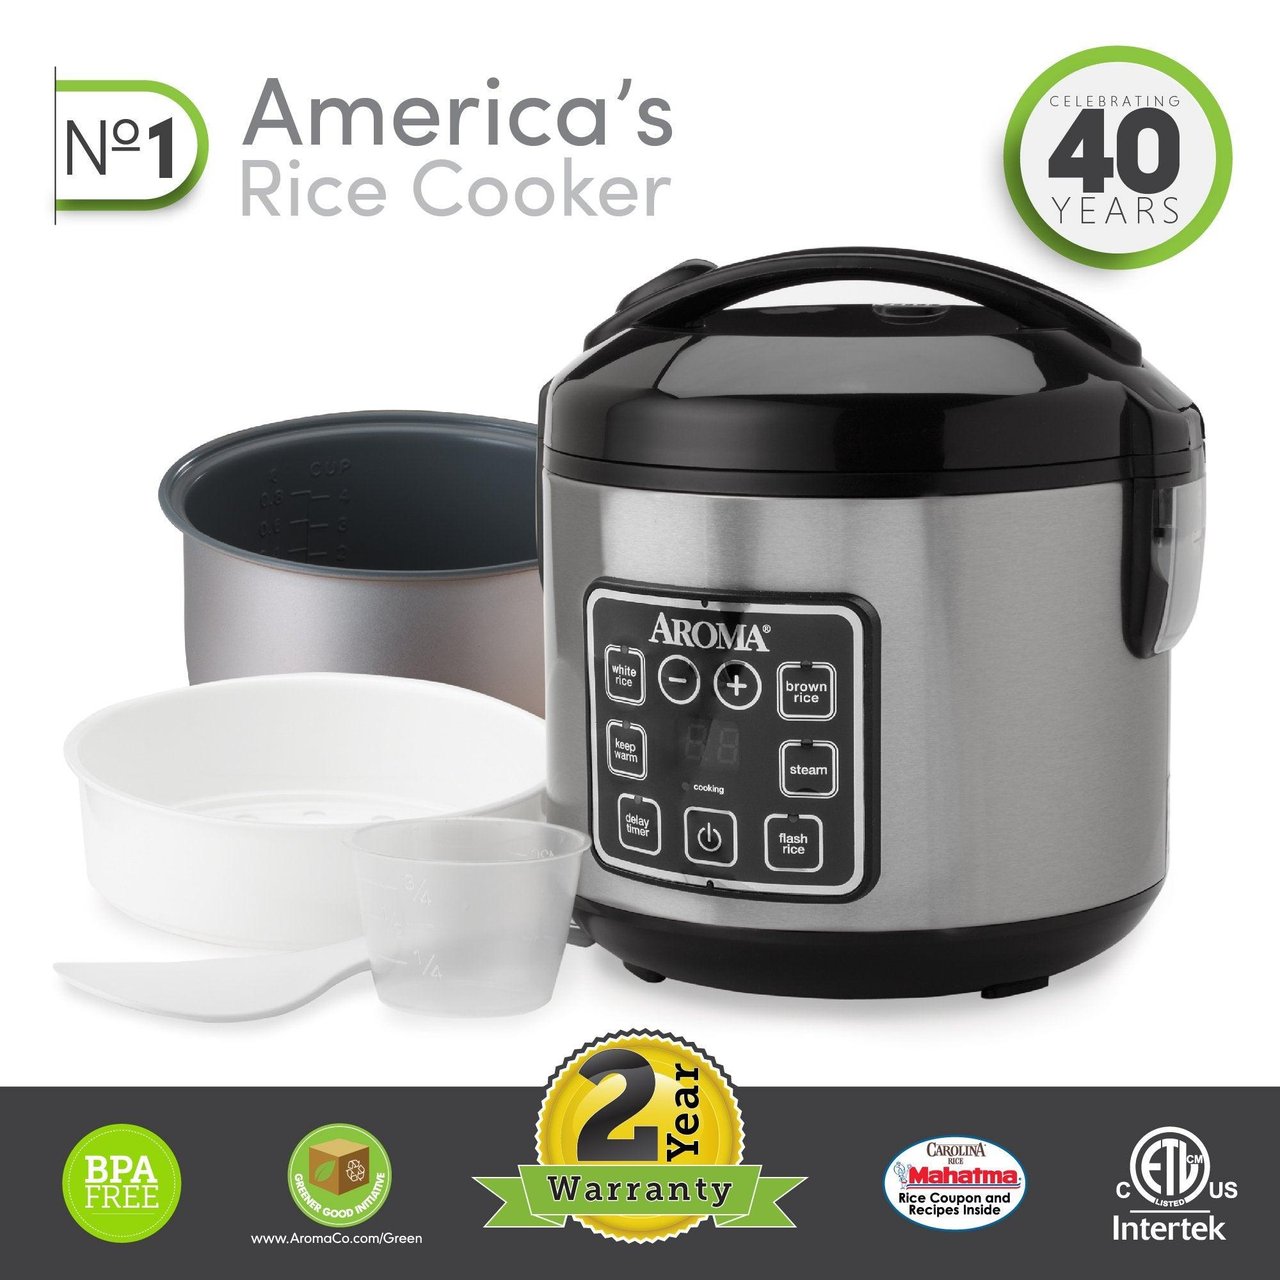 2 AROMA Digital Rice Cooker, 4-Cup (Uncooked) / 8-Cup (Cooked), Steamer, Grain Cooker, Multicooker, 2 Qt, Stainless Steel Exterior, ARC-914SBD